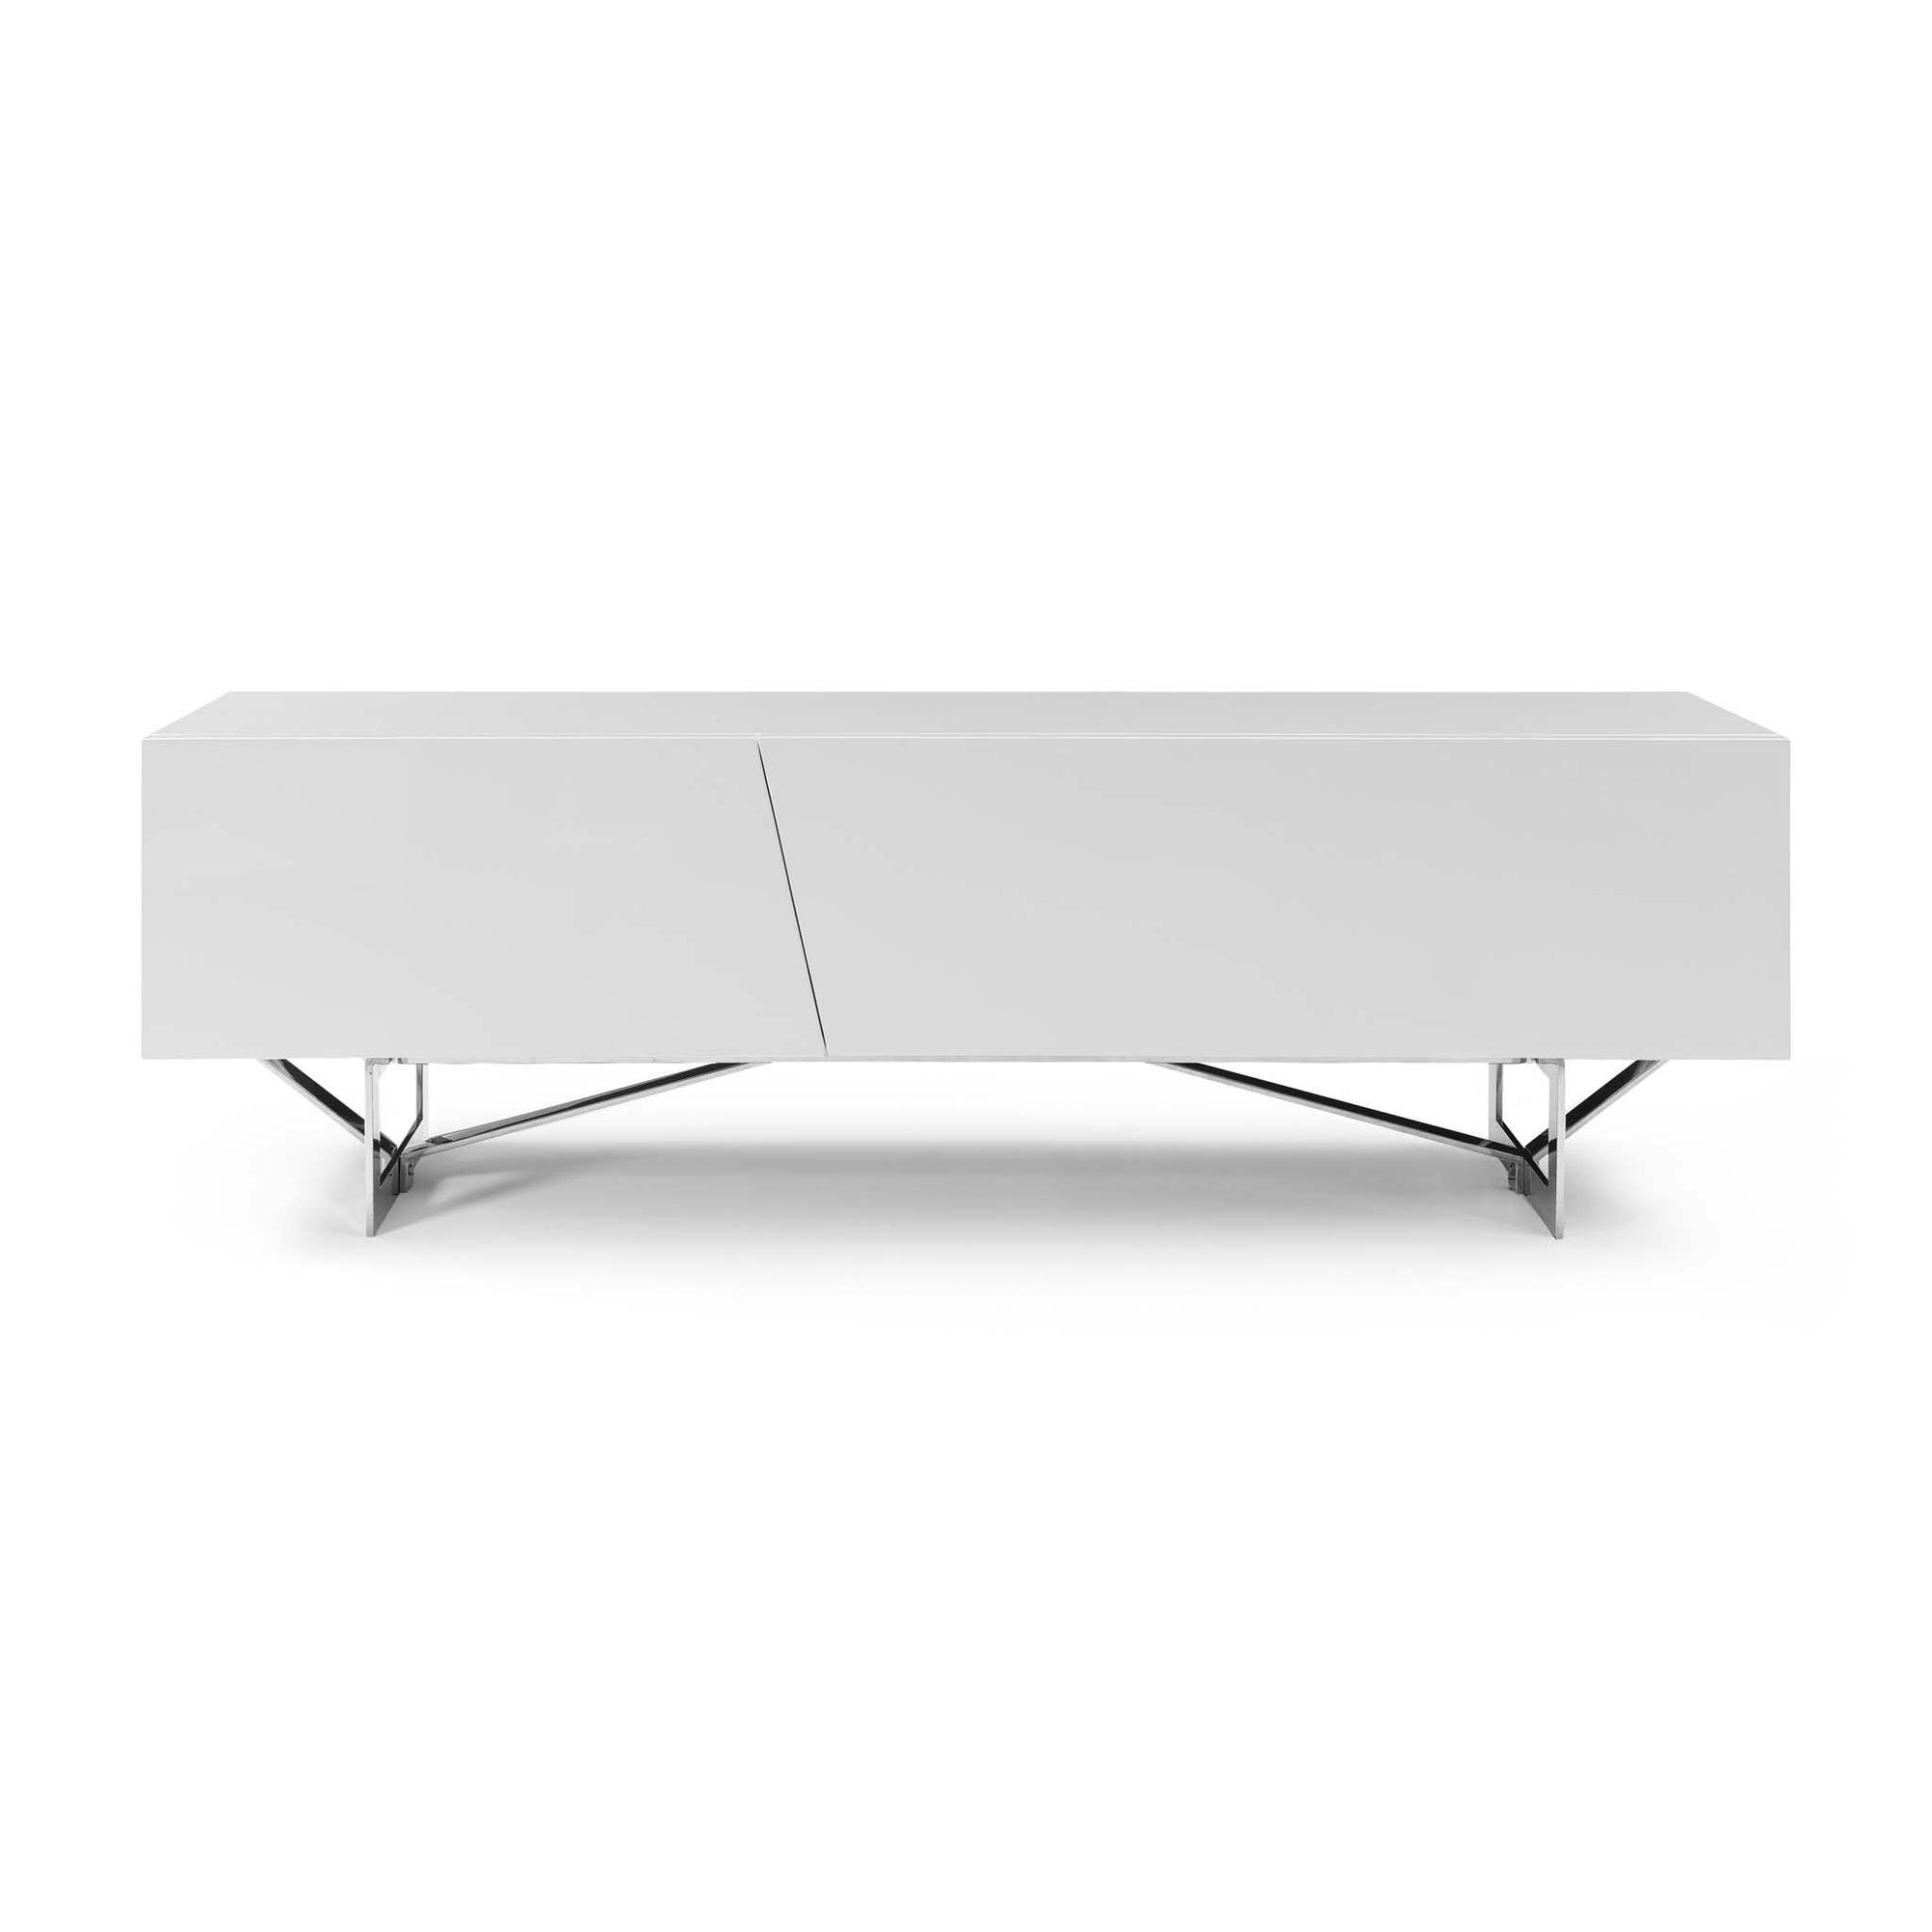 Bellini-Saleen TV Stand Gloss W/ Stainless Steel Legs-TV Stands-MODTEMPO